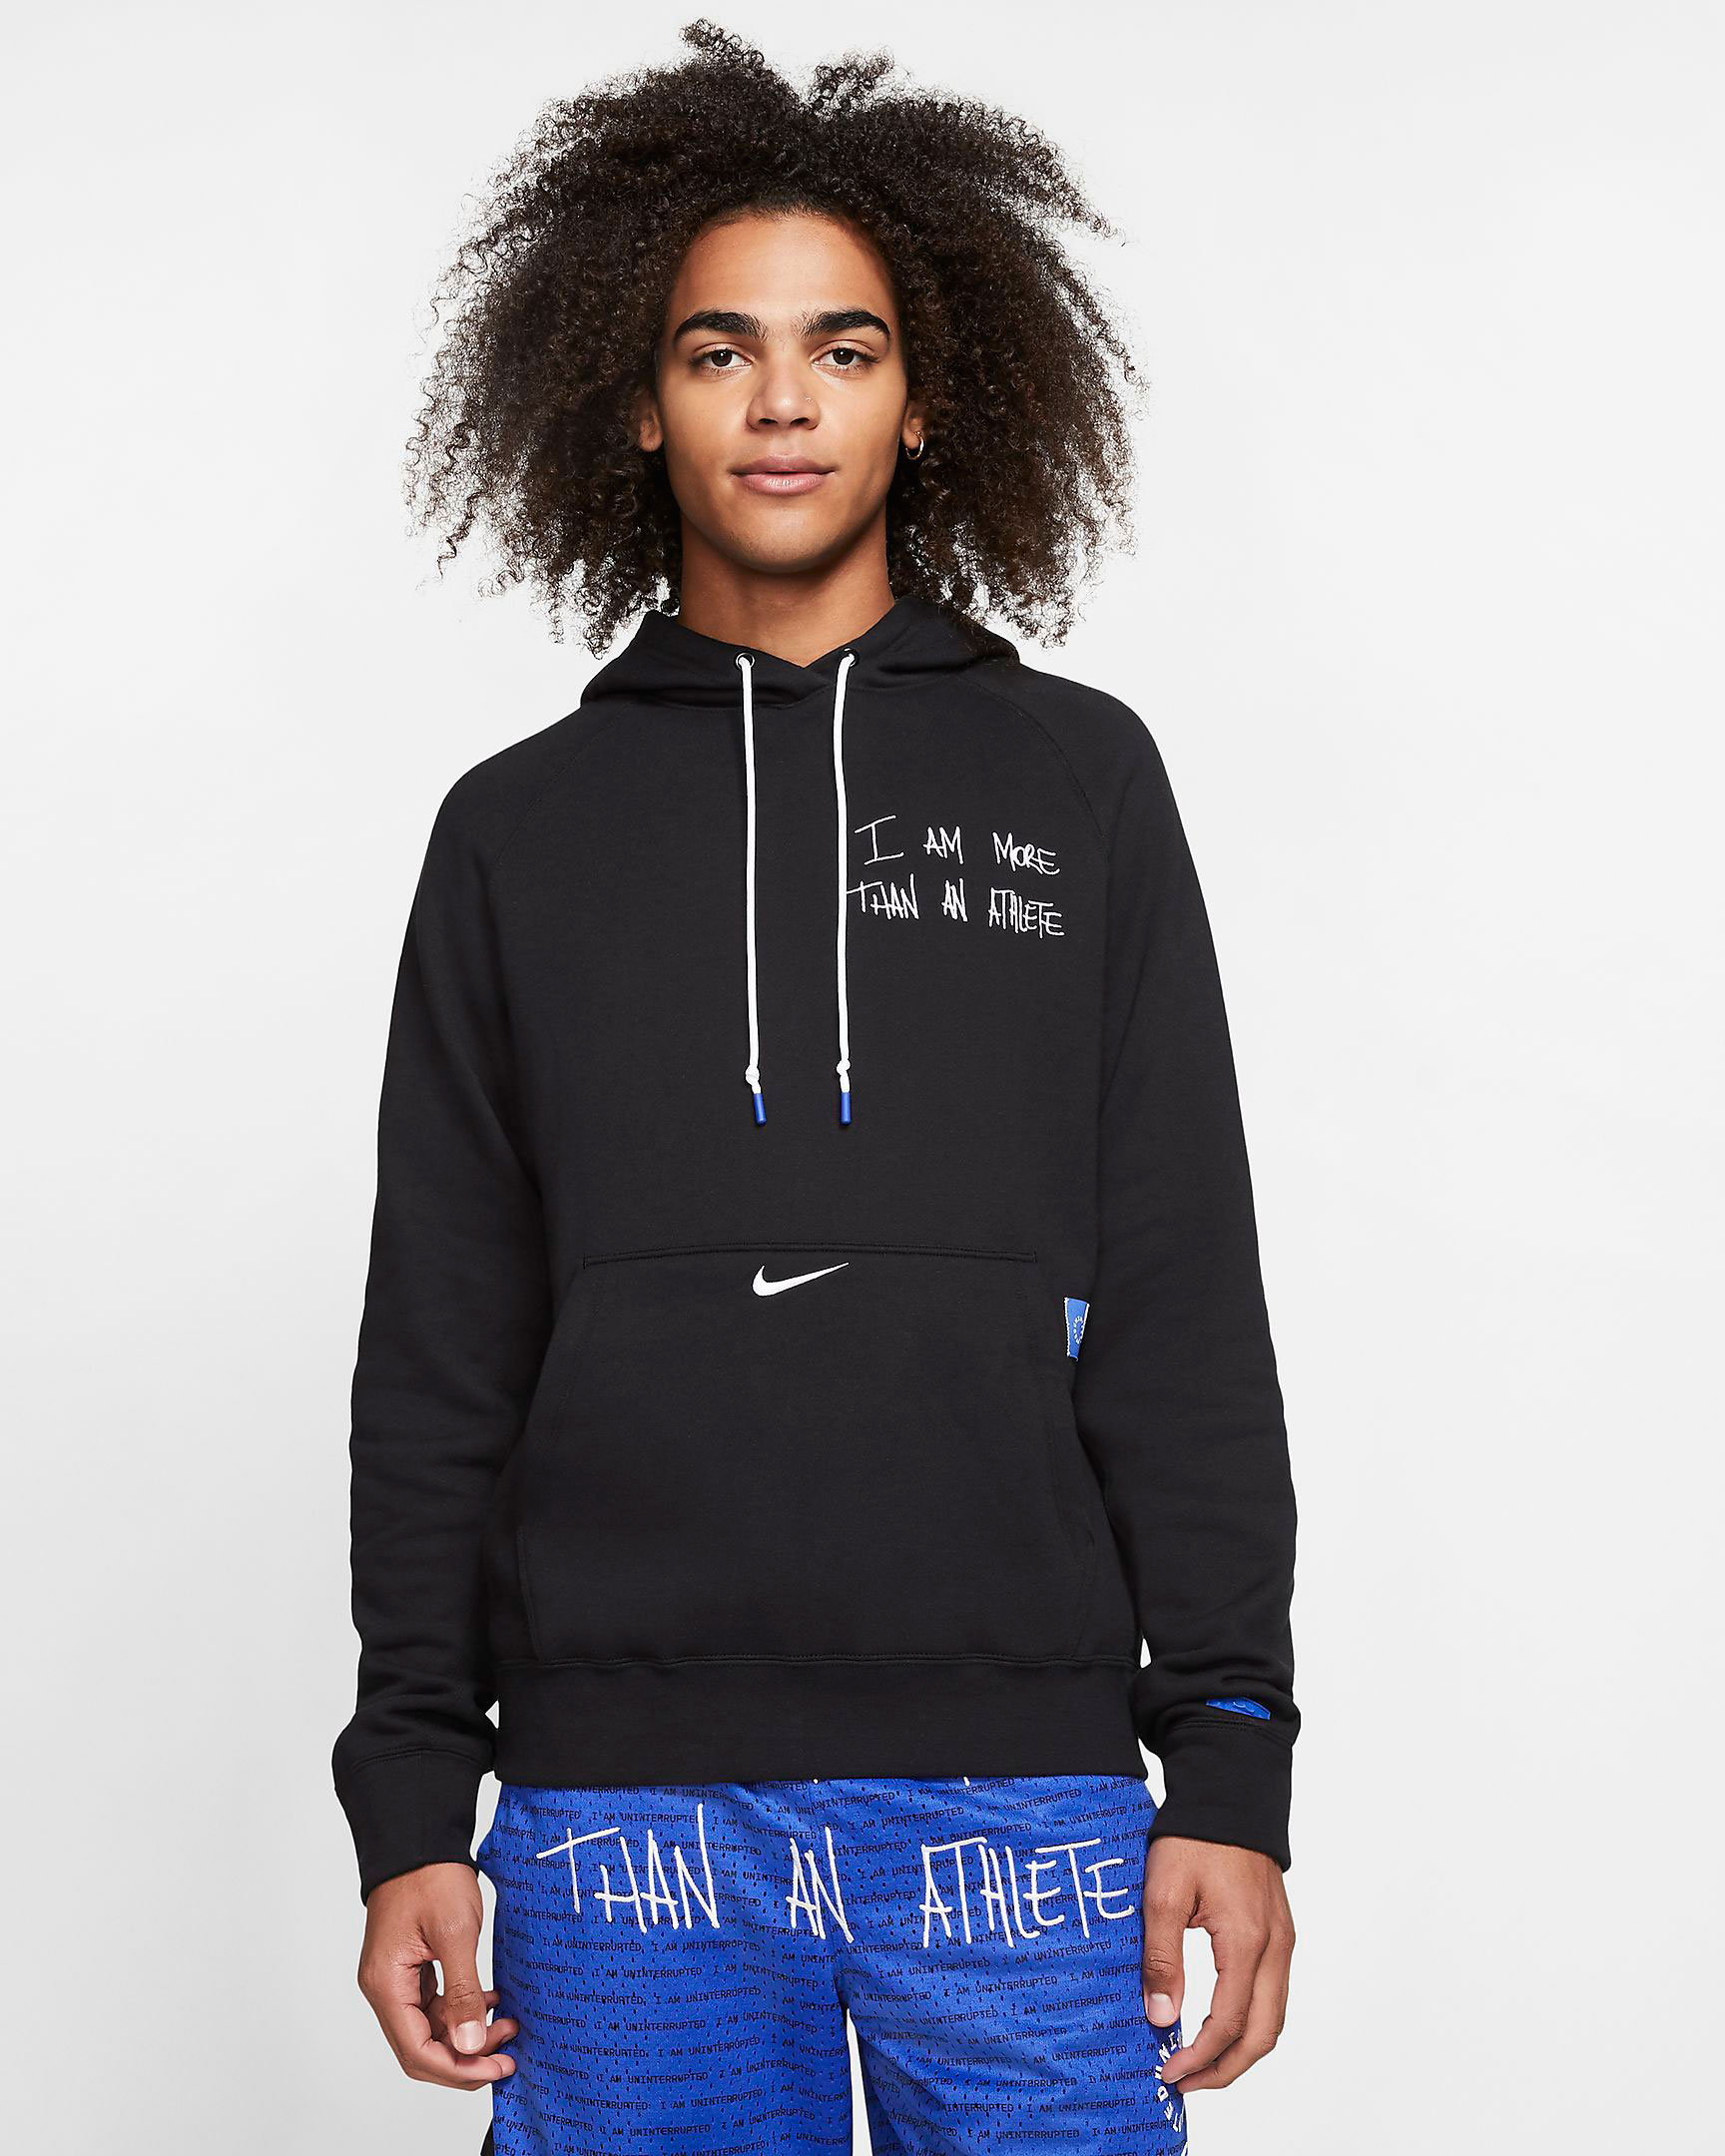 nike-lebron-17-more-than-an-athlete-uninterrupted-hoodie-1